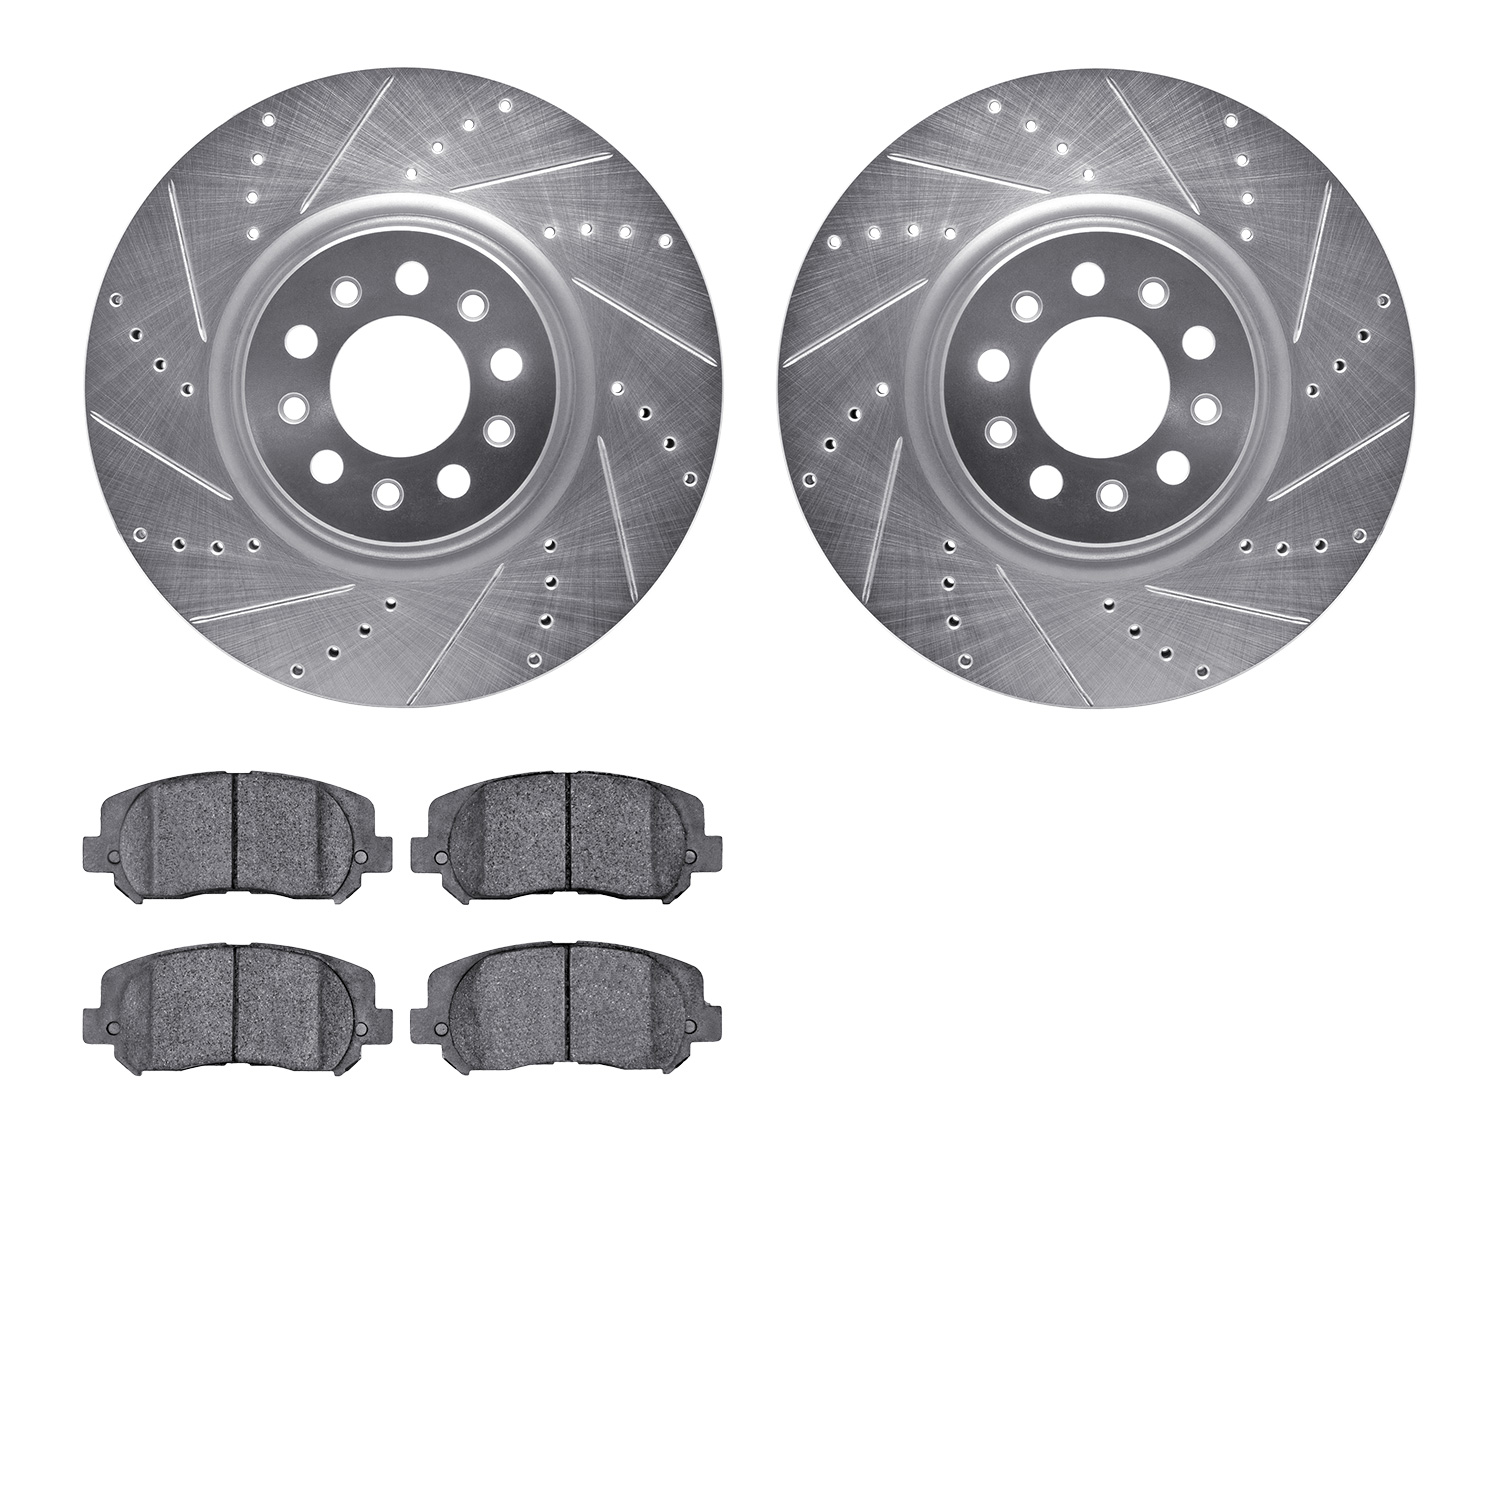 7402-42014 Drilled/Slotted Brake Rotors with Ultimate-Duty Brake Pads Kit [Silver], Fits Select Mopar, Position: Front